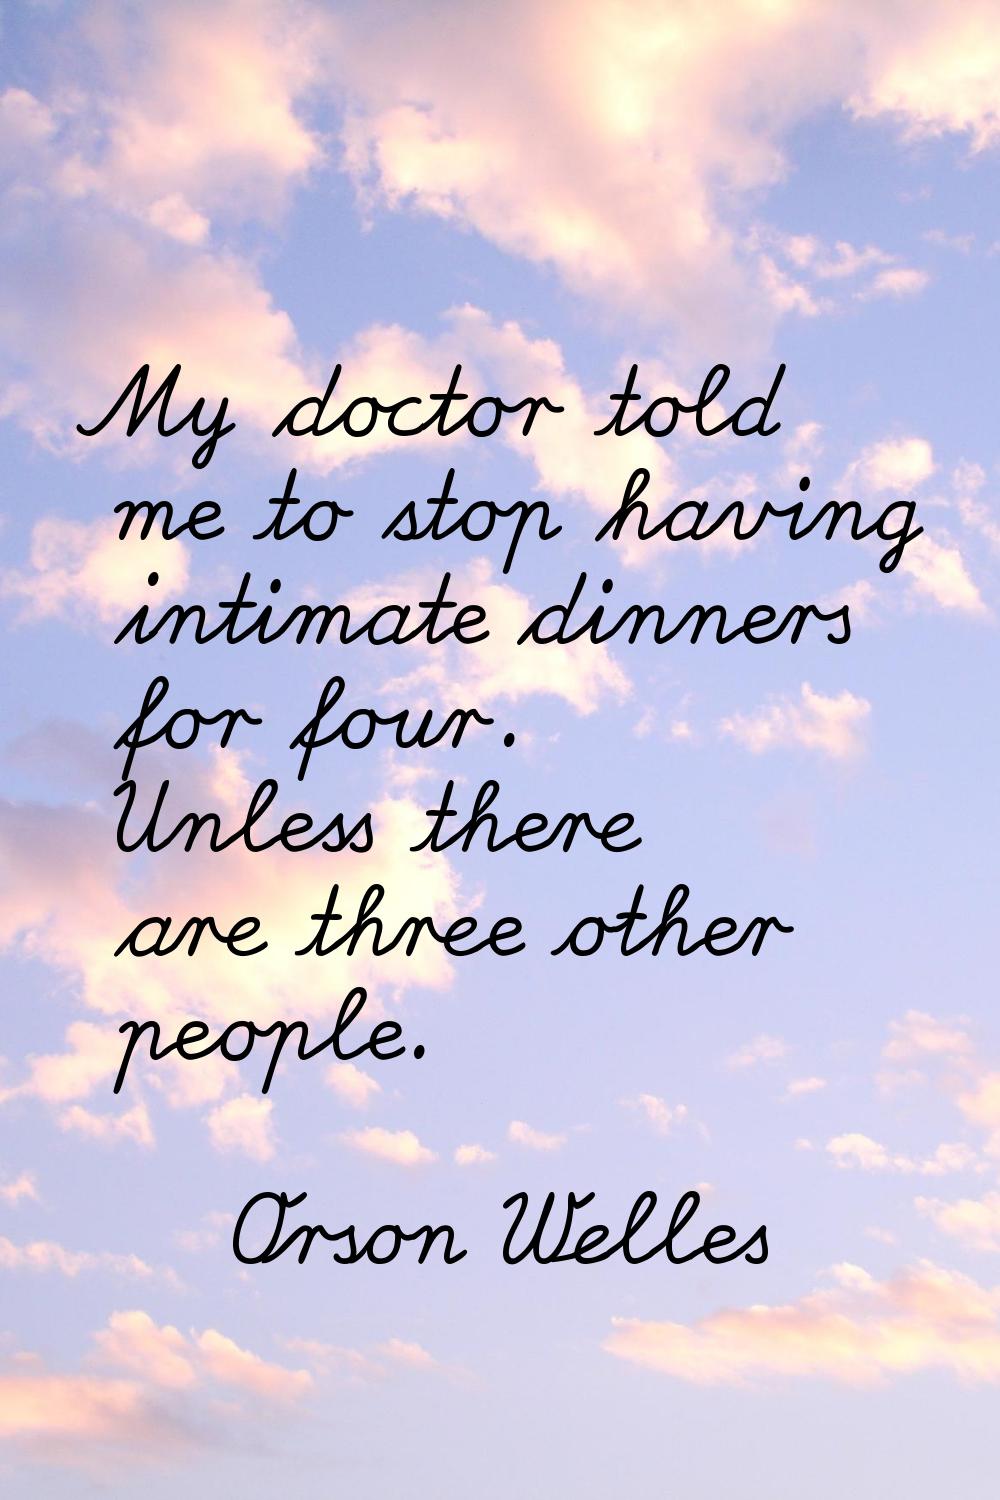 My doctor told me to stop having intimate dinners for four. Unless there are three other people.